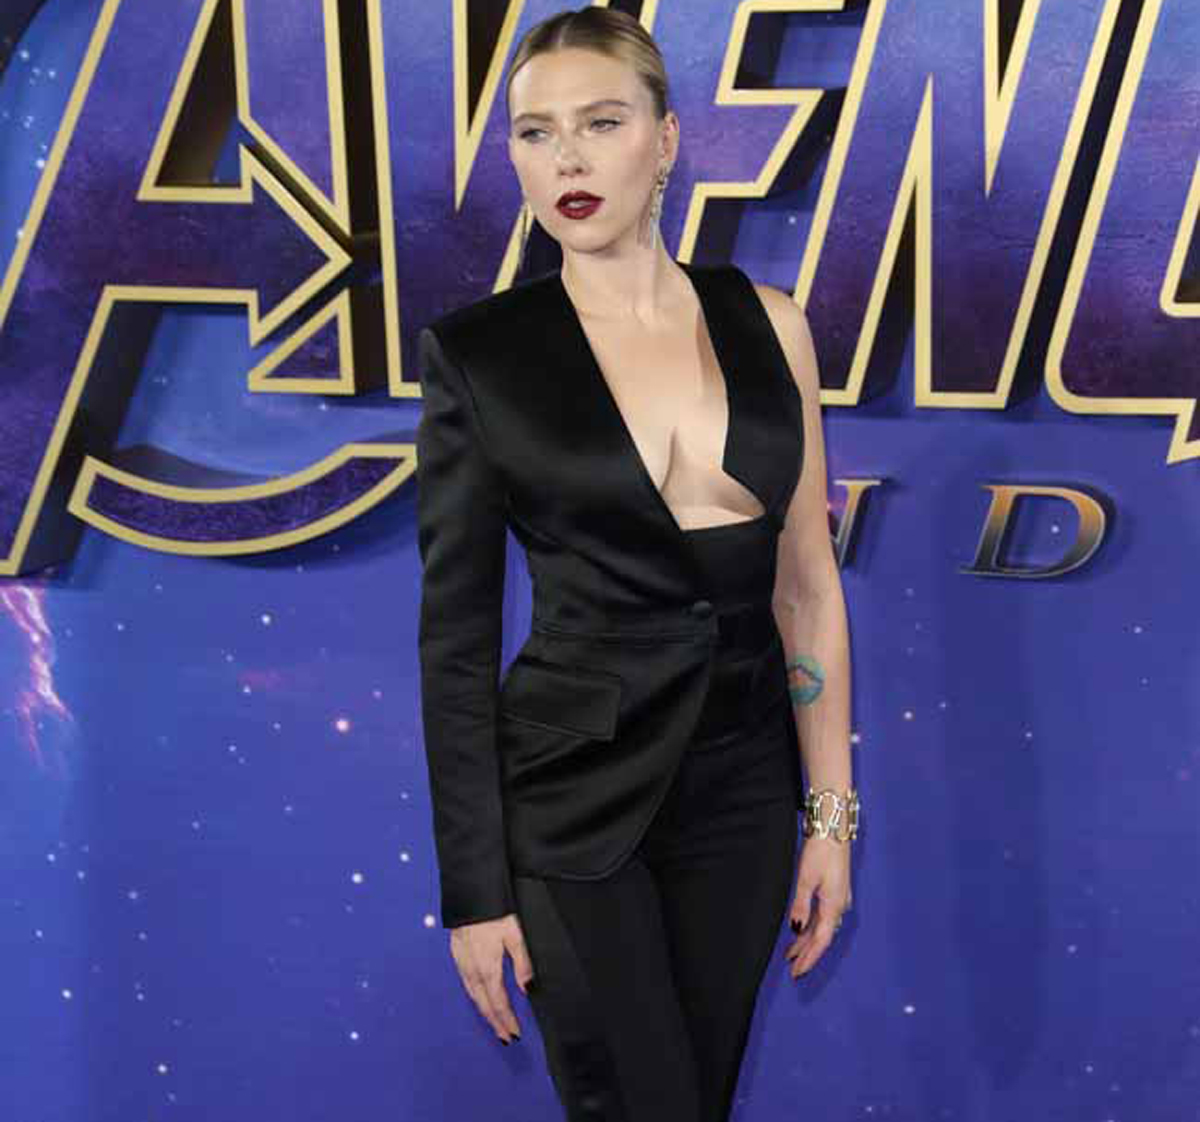 Scarlett Johansson on acne, lymphatic drainage and arguing with Adam Driver